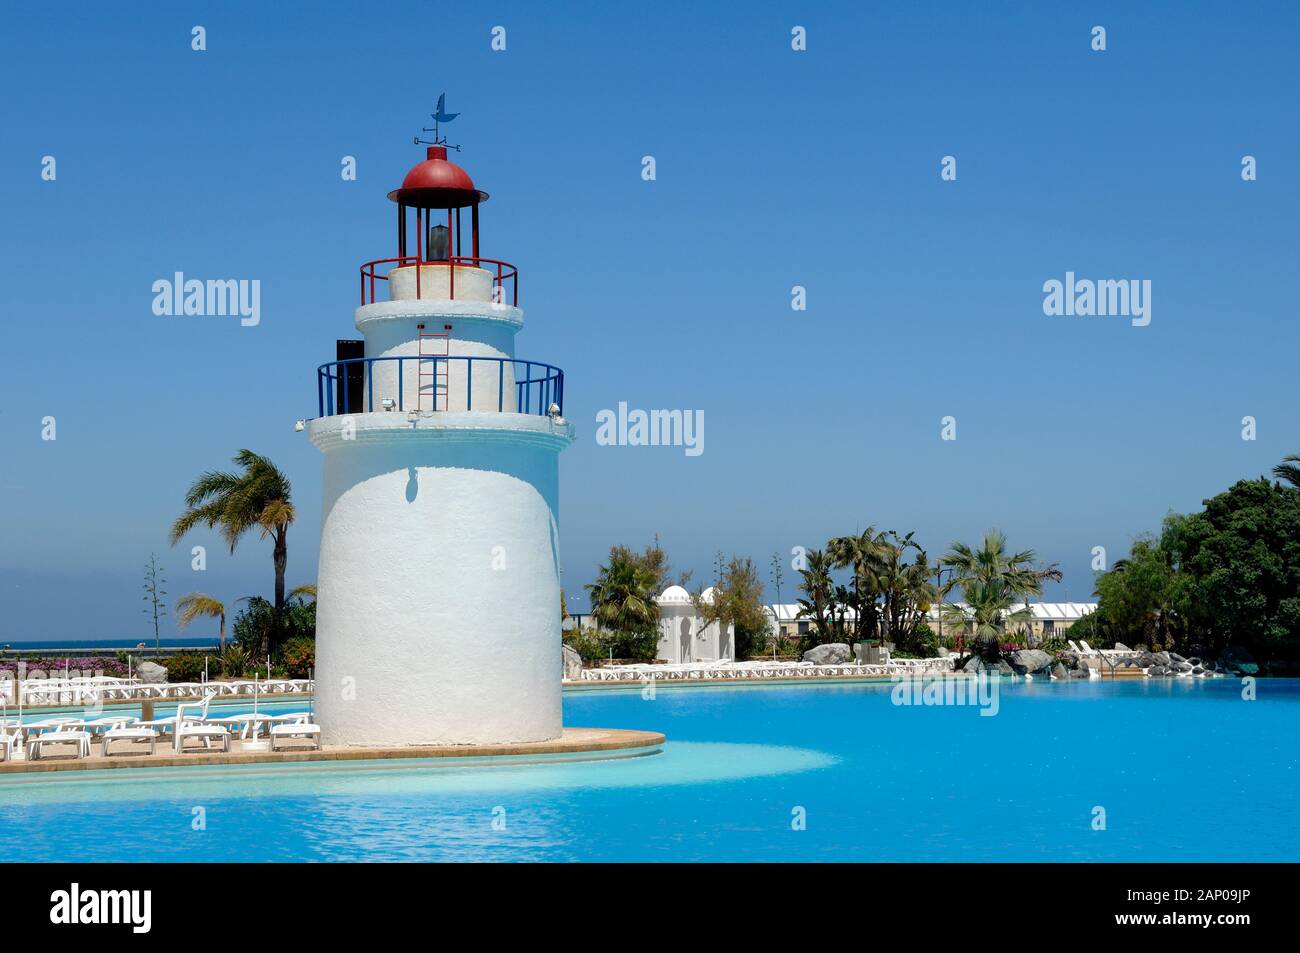 Fake Lighthouse & Outdoor Public Swimming Pool at the Maritime Park Ceuta Spain Stock Photo